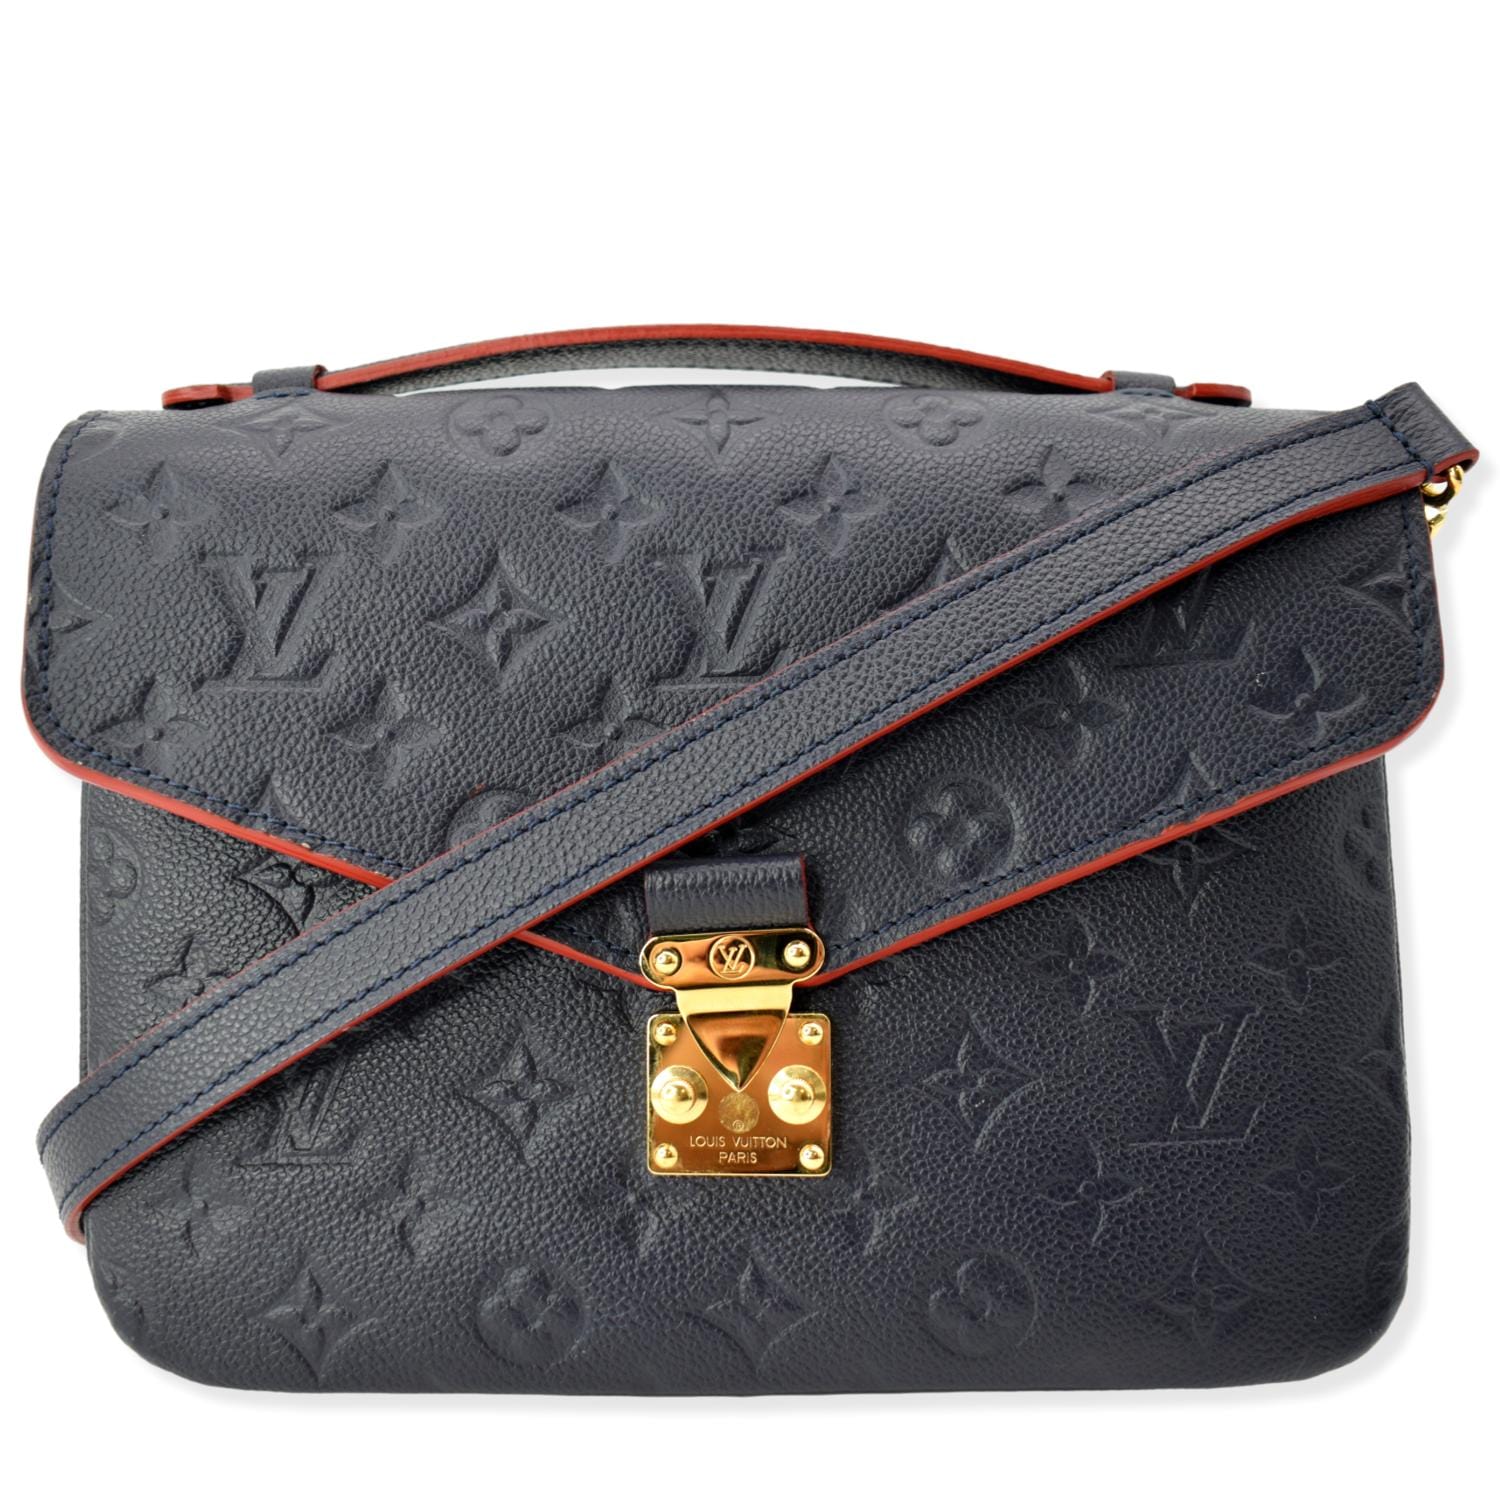 JUST IN🤩 This Louis Vuitton Pochette Metis comes with box, bag, and duster  for $2,398